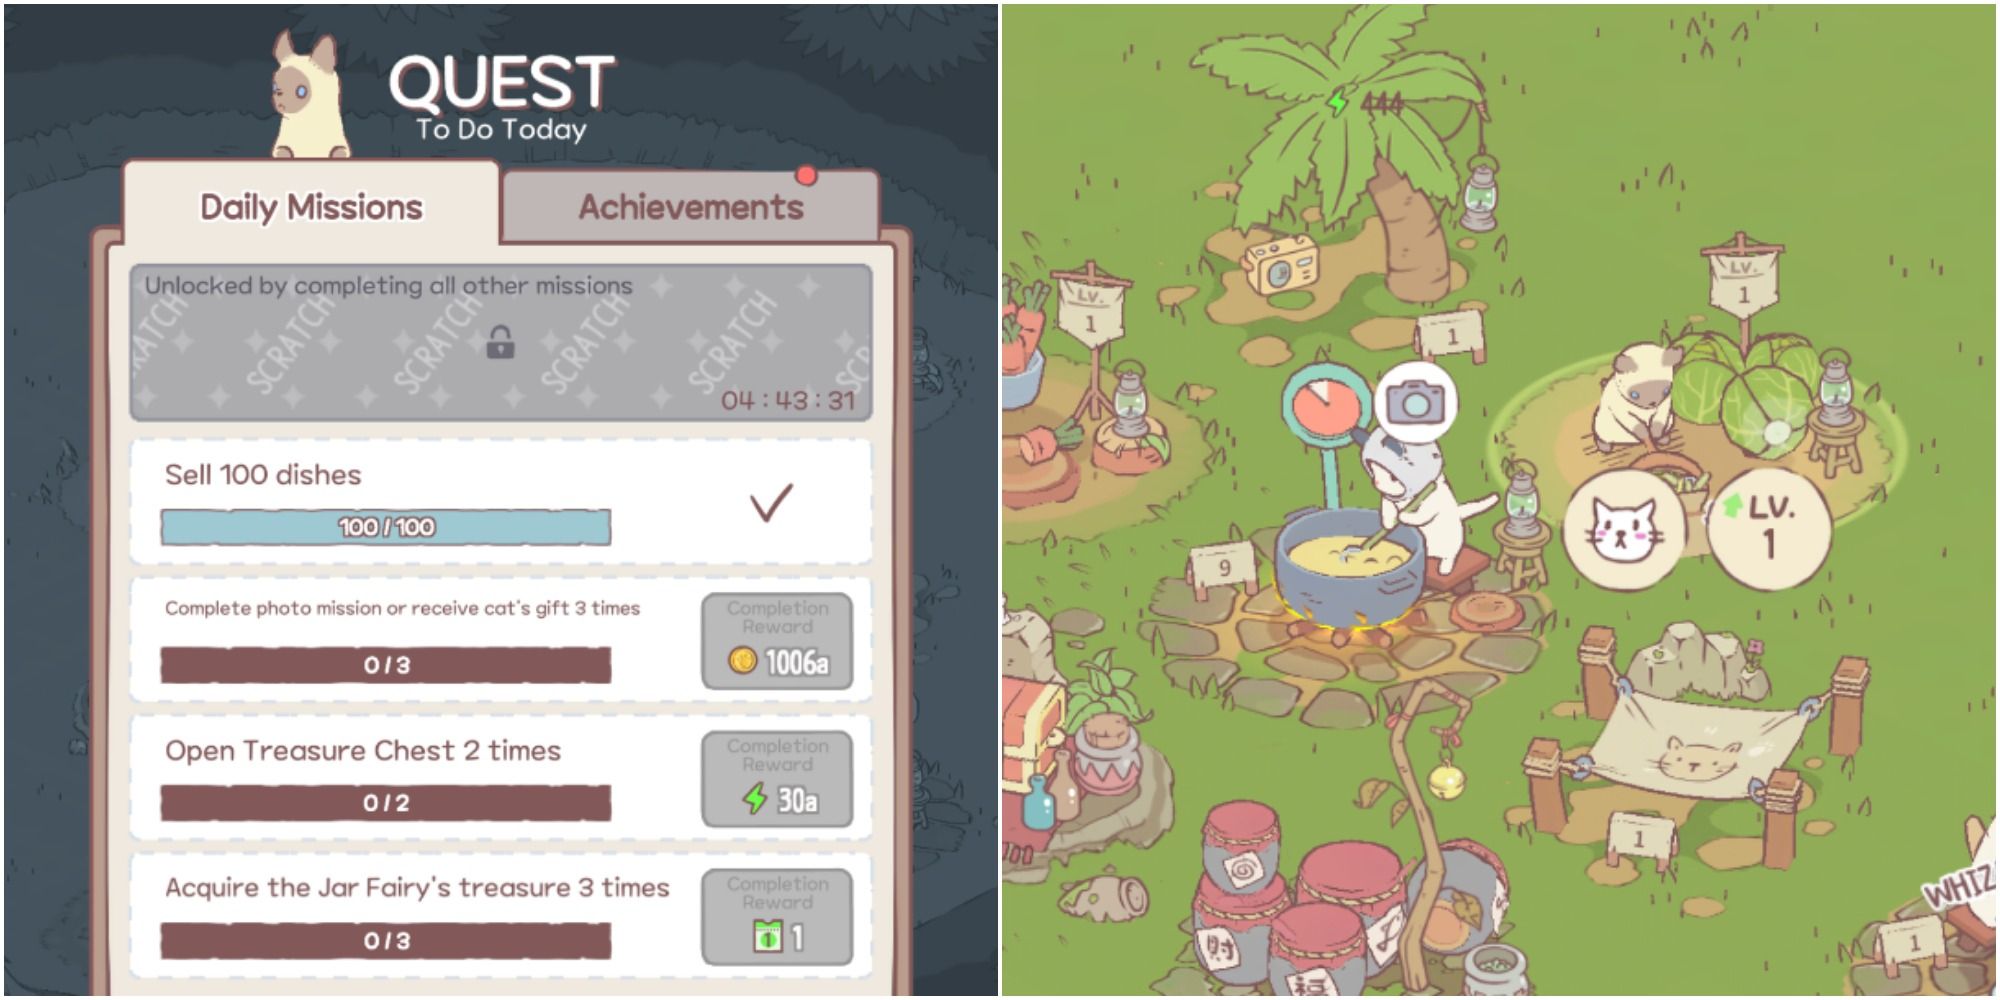 Split image of Quest menu and the cats making soup in the woods